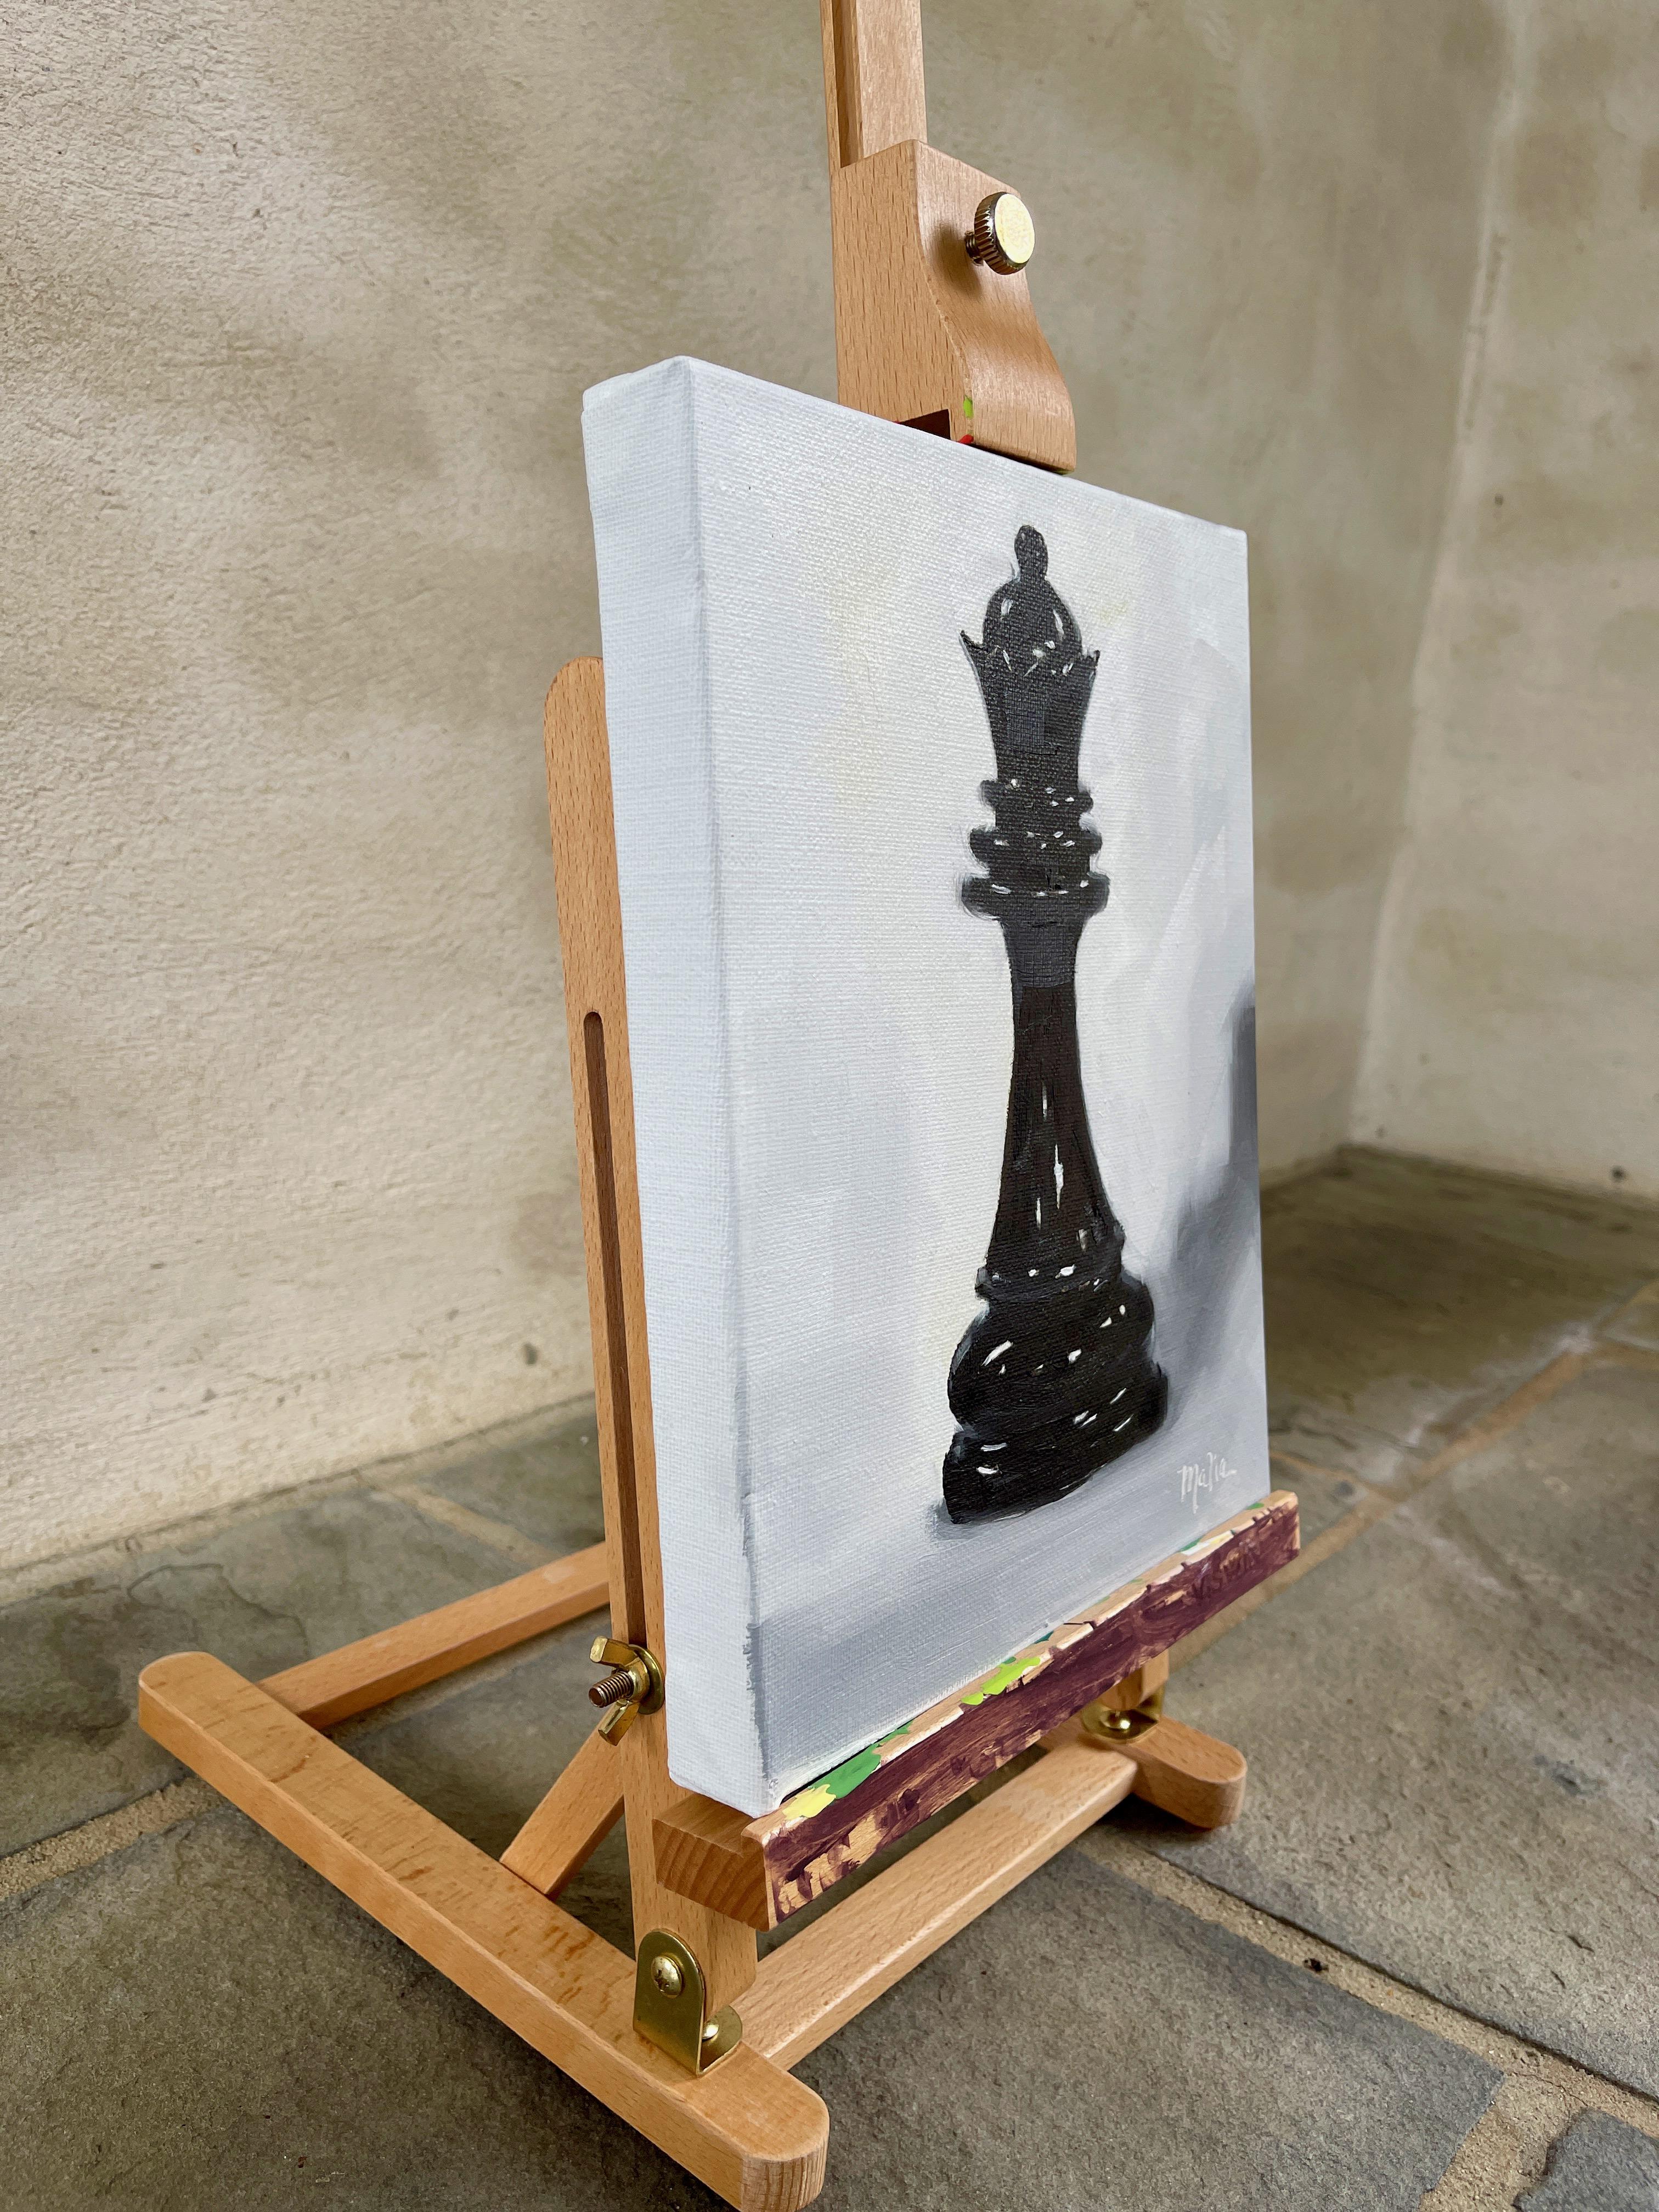 <p>Artist Comments<br>A shiny chess piece reflects artist Malia Pettit's love for portraying powerful women and captivating still-life subjects. With the ability to move in any direction and cover as much ground as she desires, the queen stands out